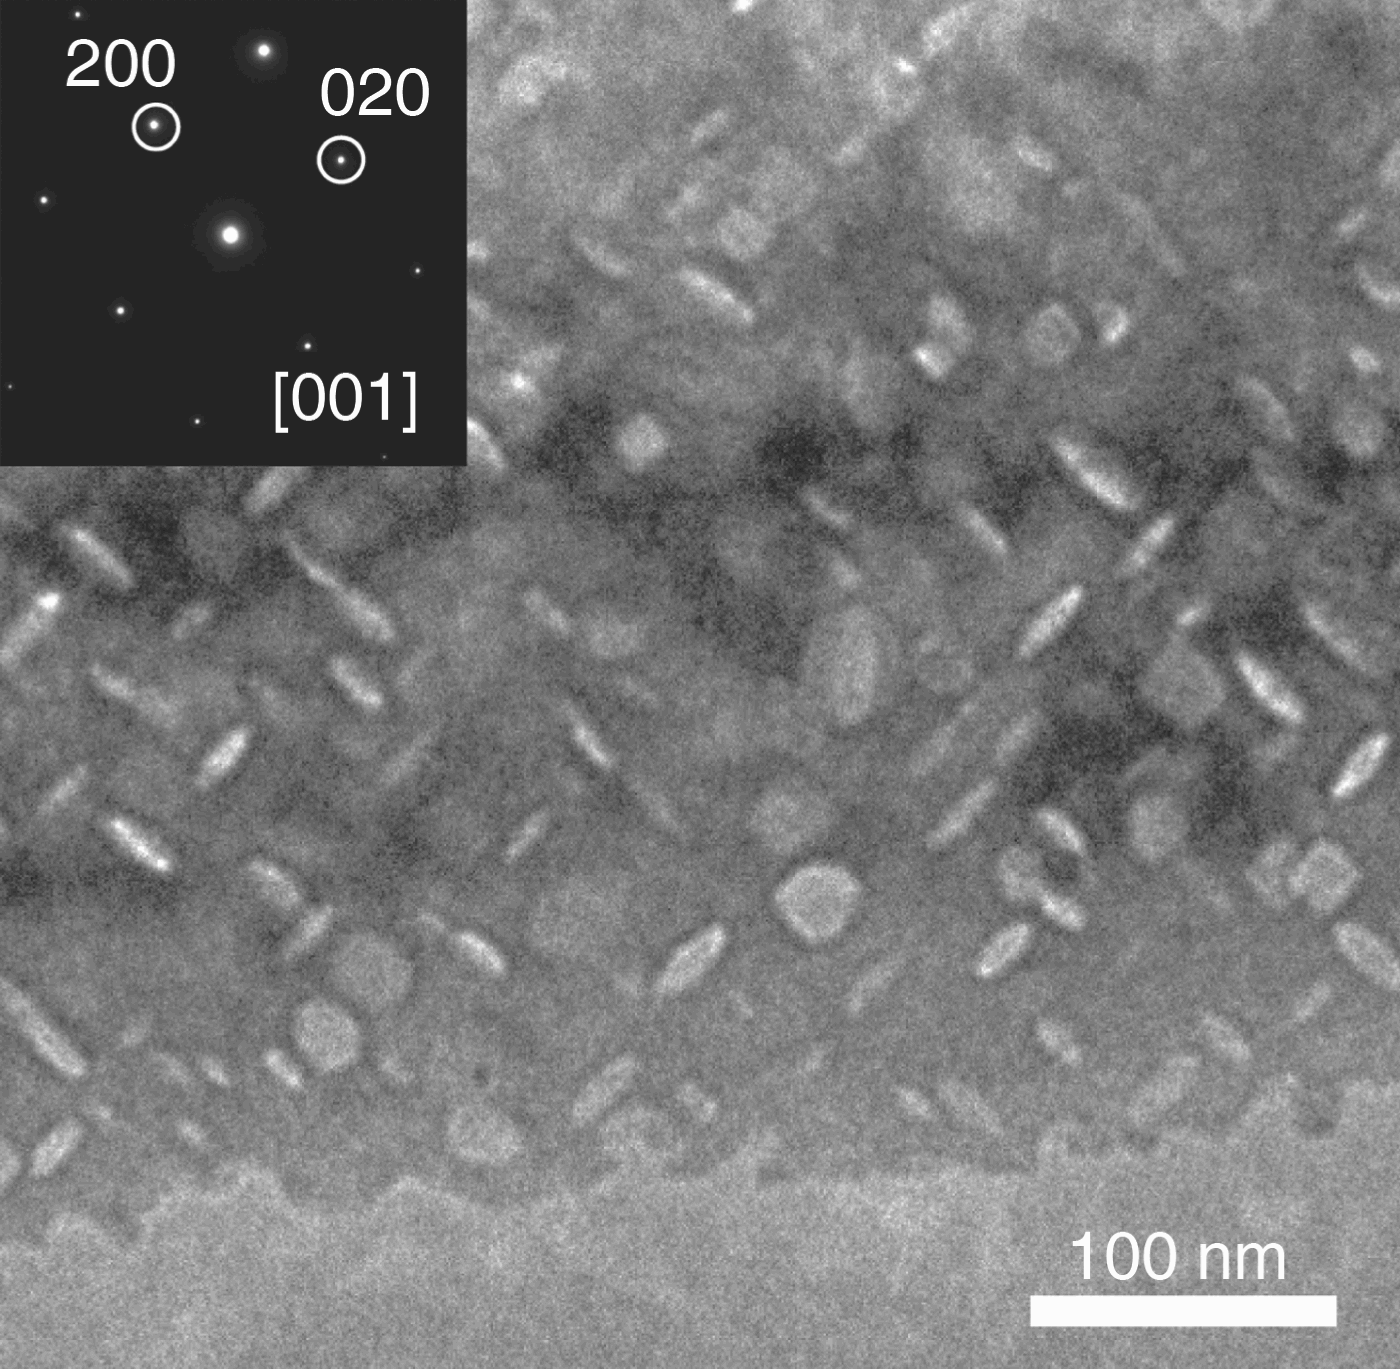 Figure 3. Bright-field TEM image of alloy 725 etched in an acidic solution showing selective etching of γ″/γ′ precipitates. Inset: corresponding SAED shows only γ reflections.